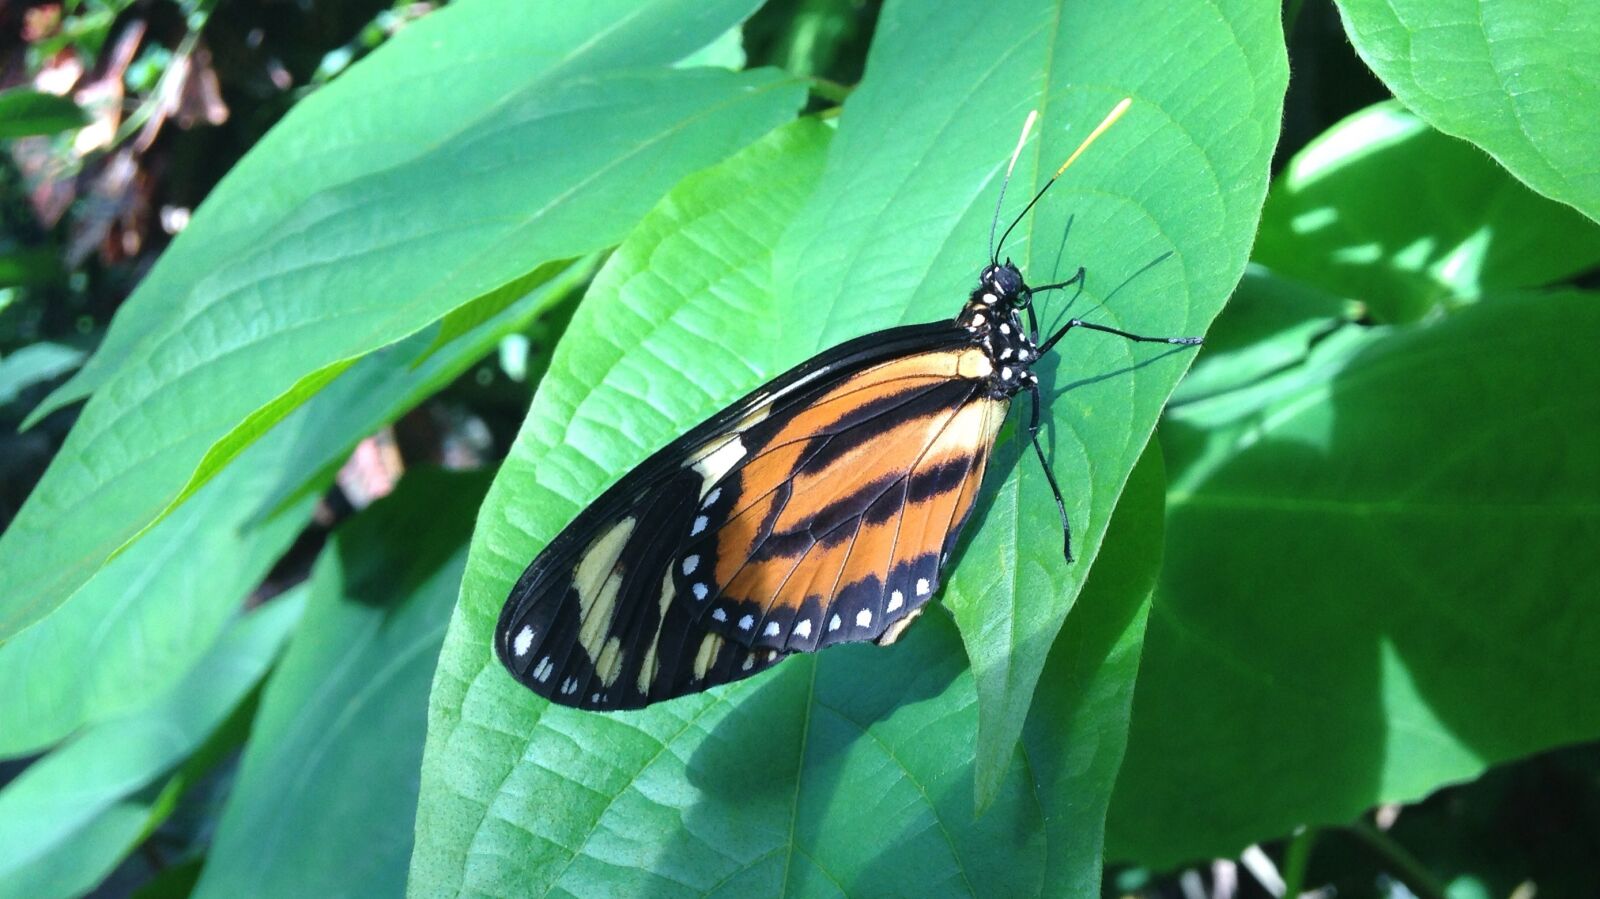 Apple iPhone 5 + iPhone 5c back camera 4.12mm f/2.4 sample photo. Butterfly, jungle, nature photography